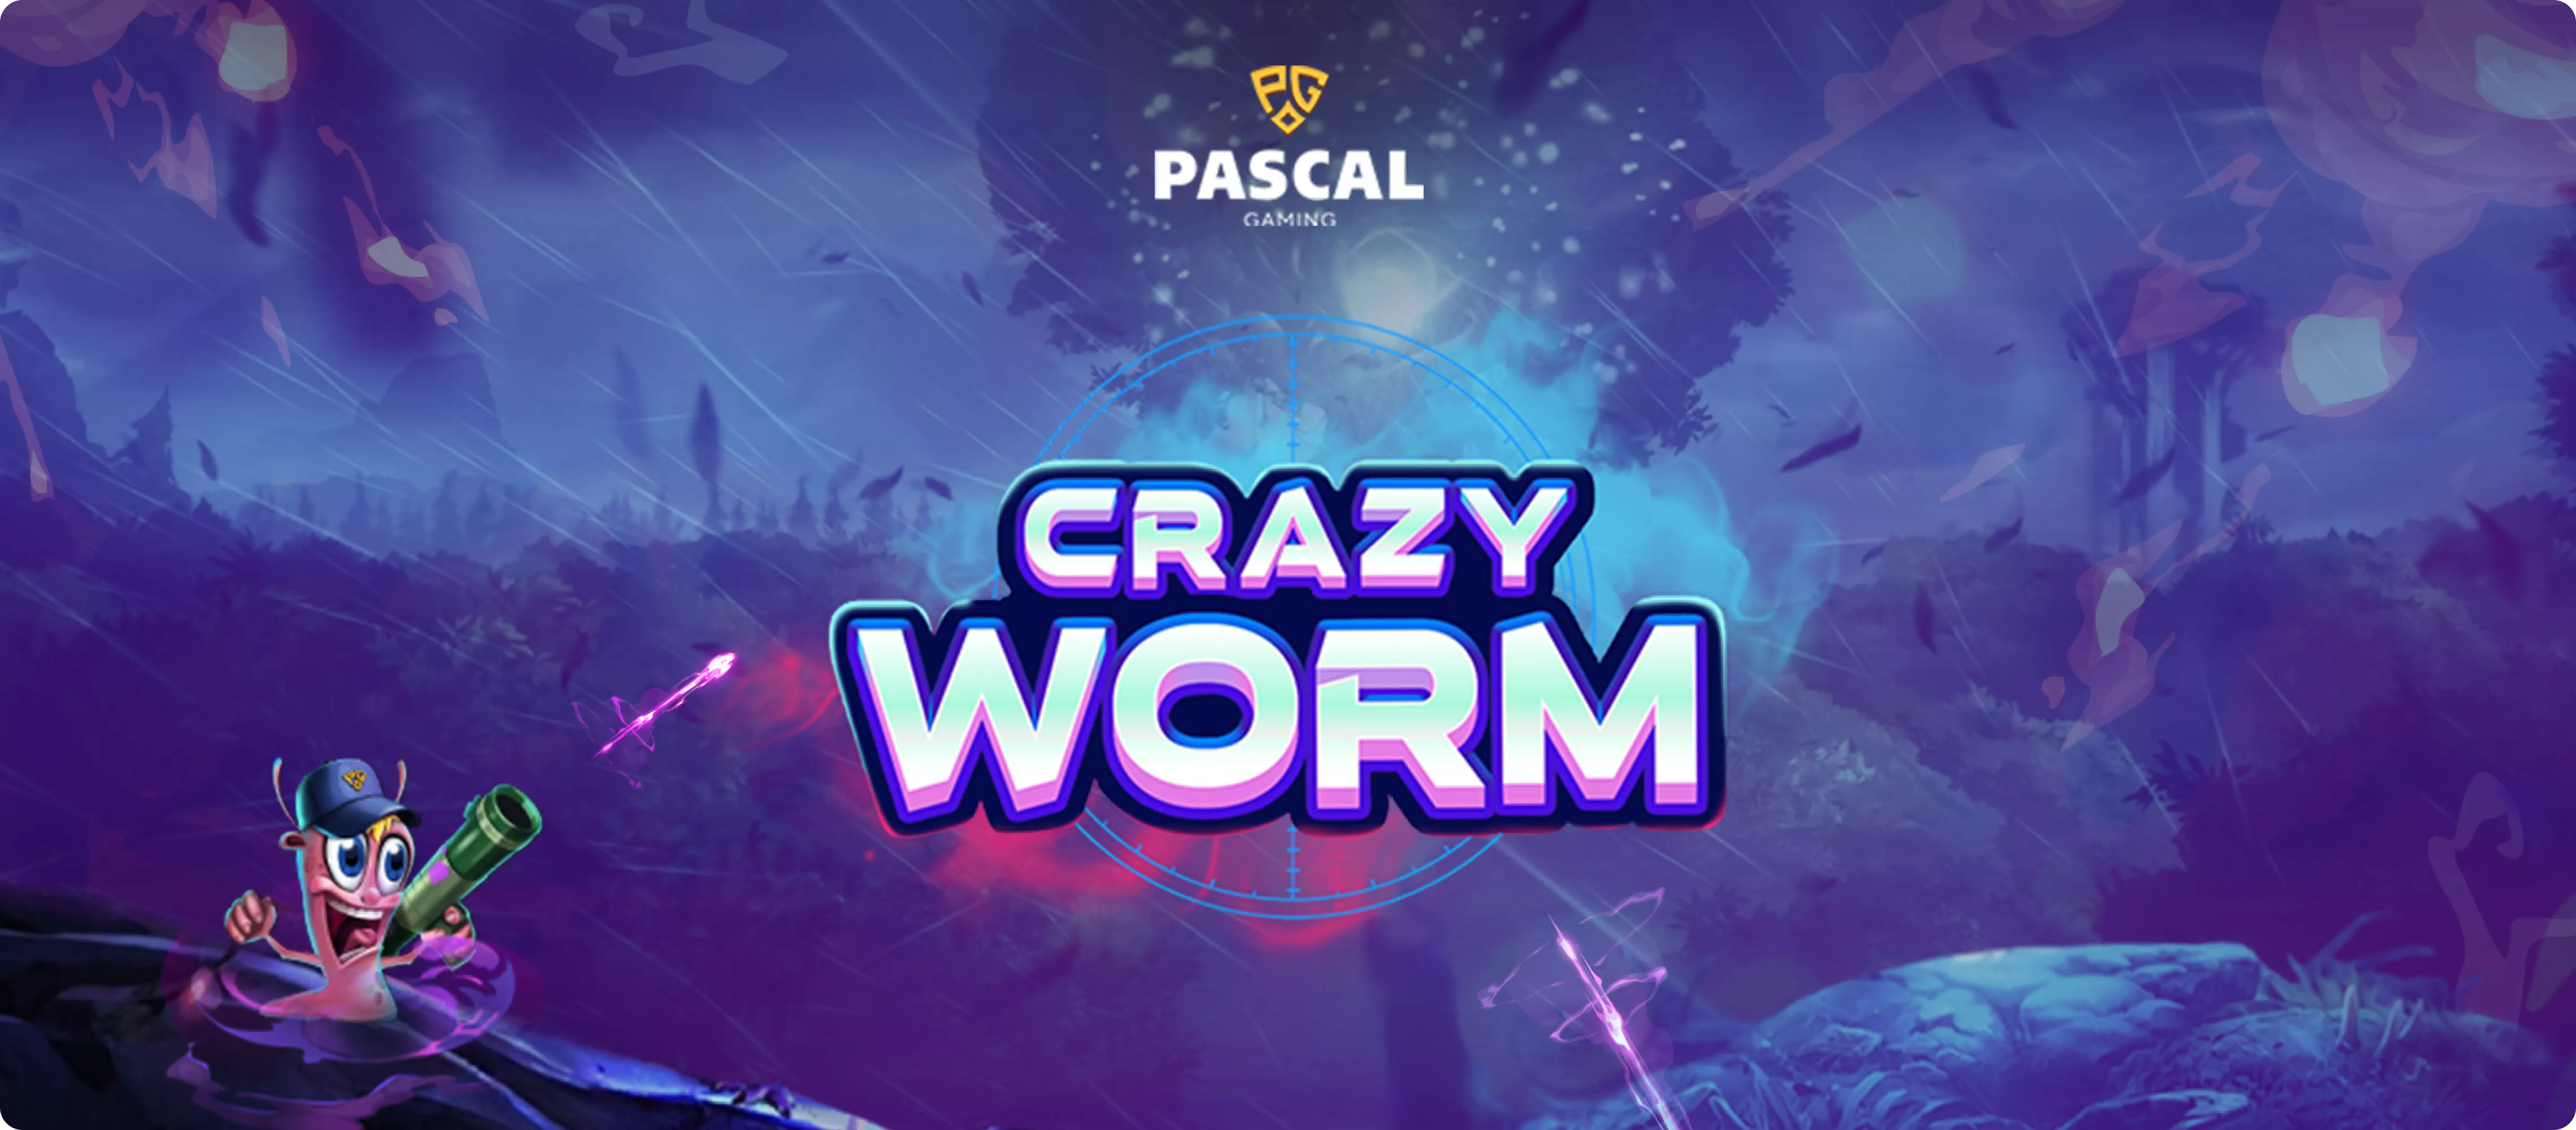 Pascal Gaming Has Released A New Game Called Crazy Worm